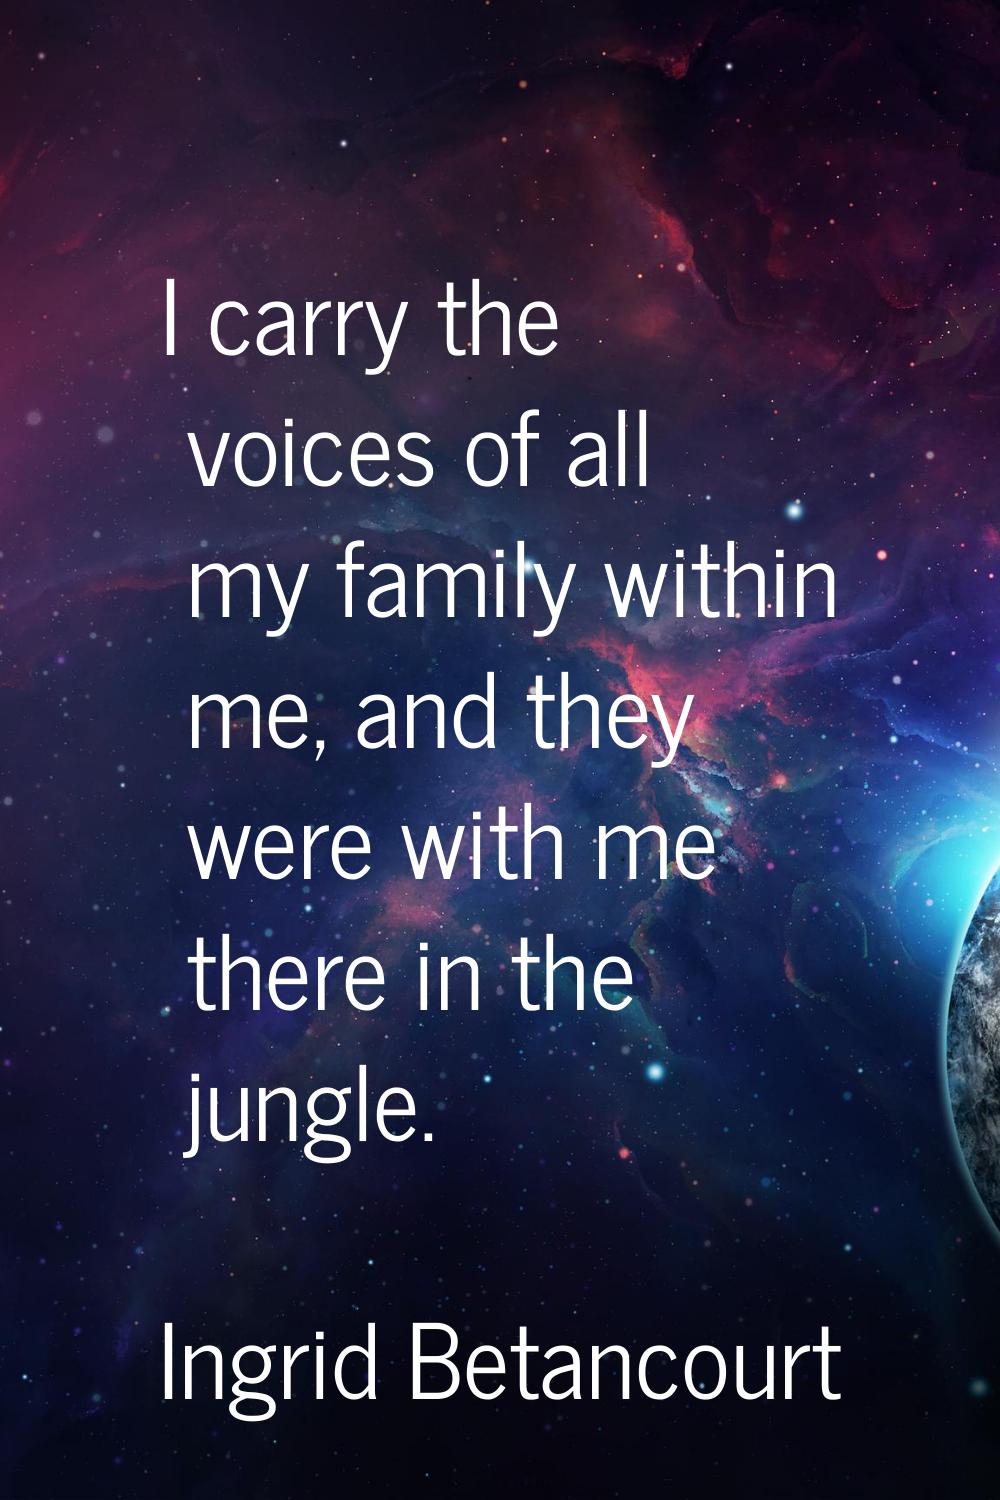 I carry the voices of all my family within me, and they were with me there in the jungle.